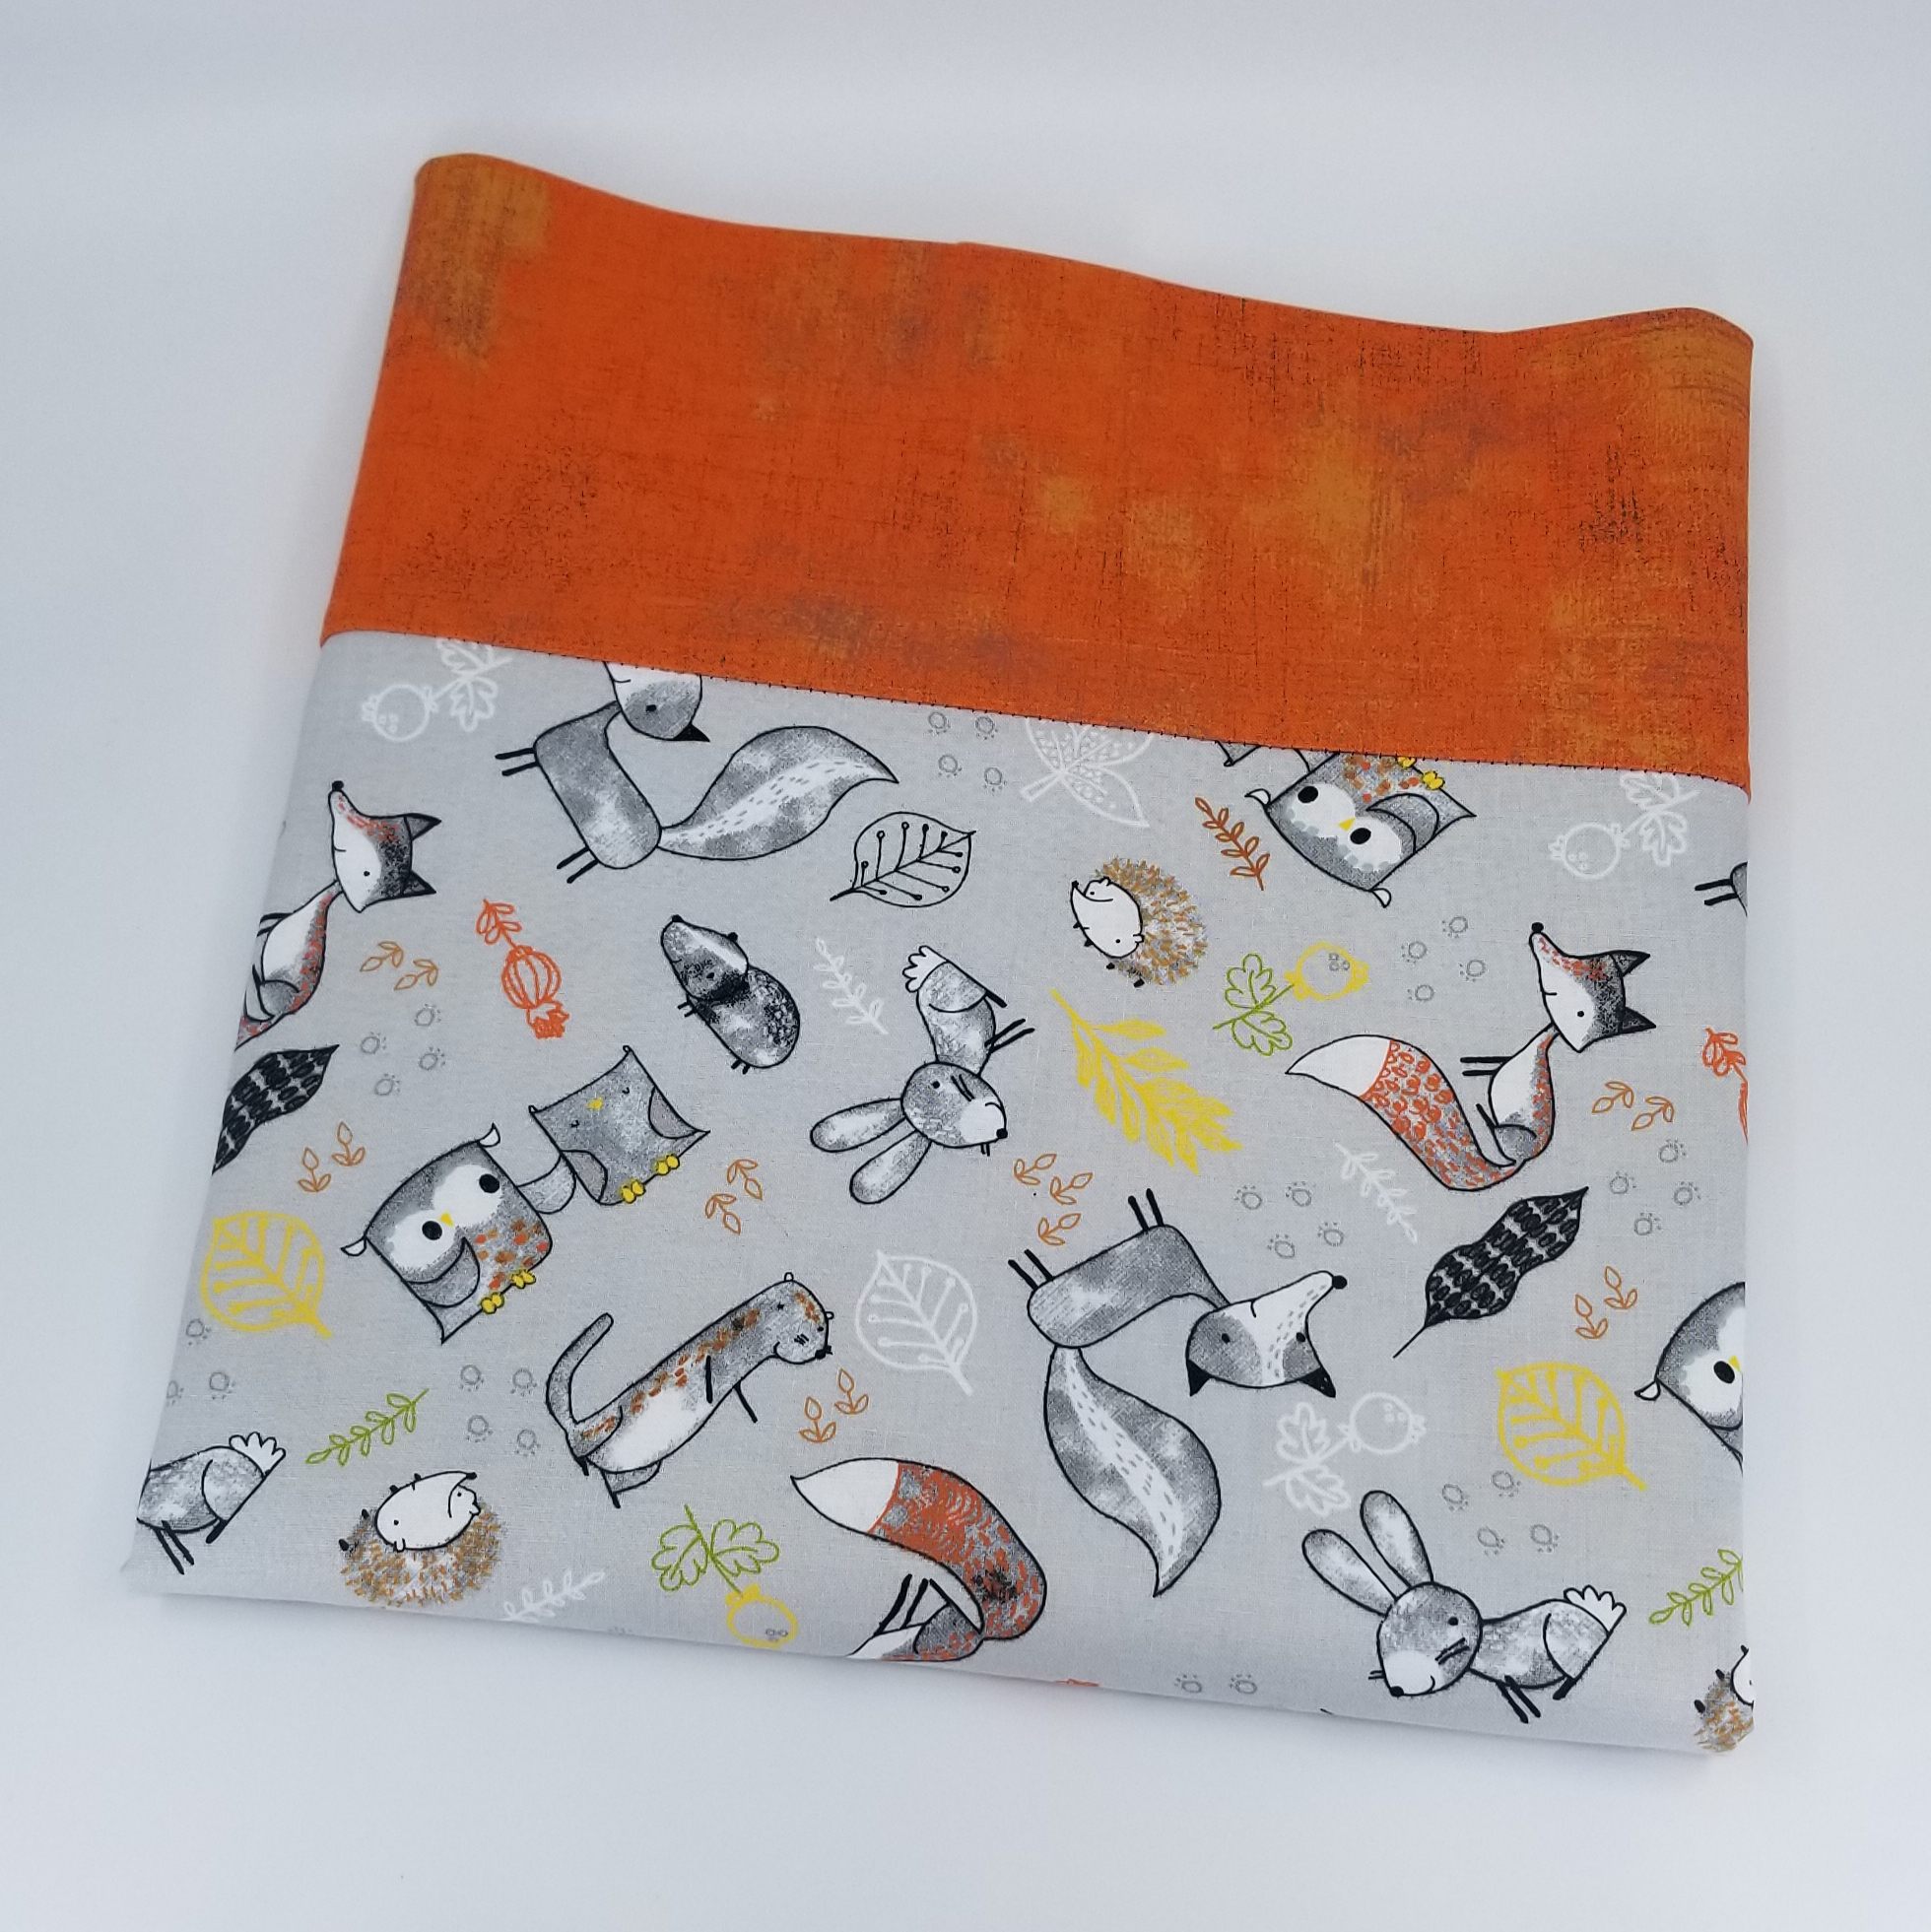 Handmade 100% cotton pillowcase with pattern of forest animals and orange border